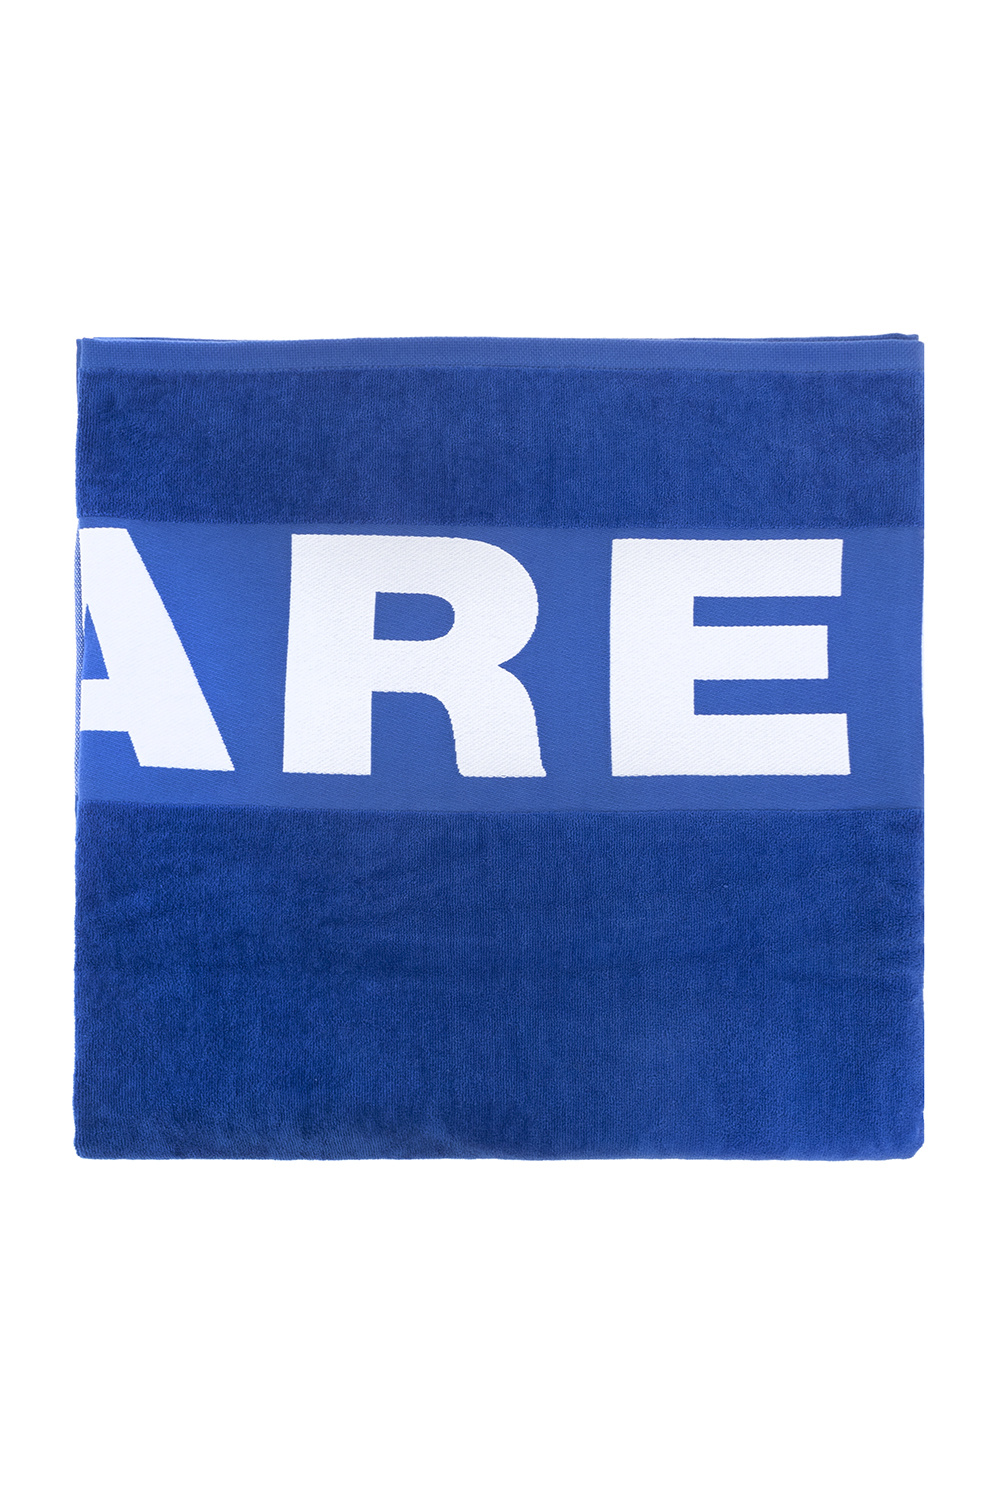 Dsquared2 Branded beach towel